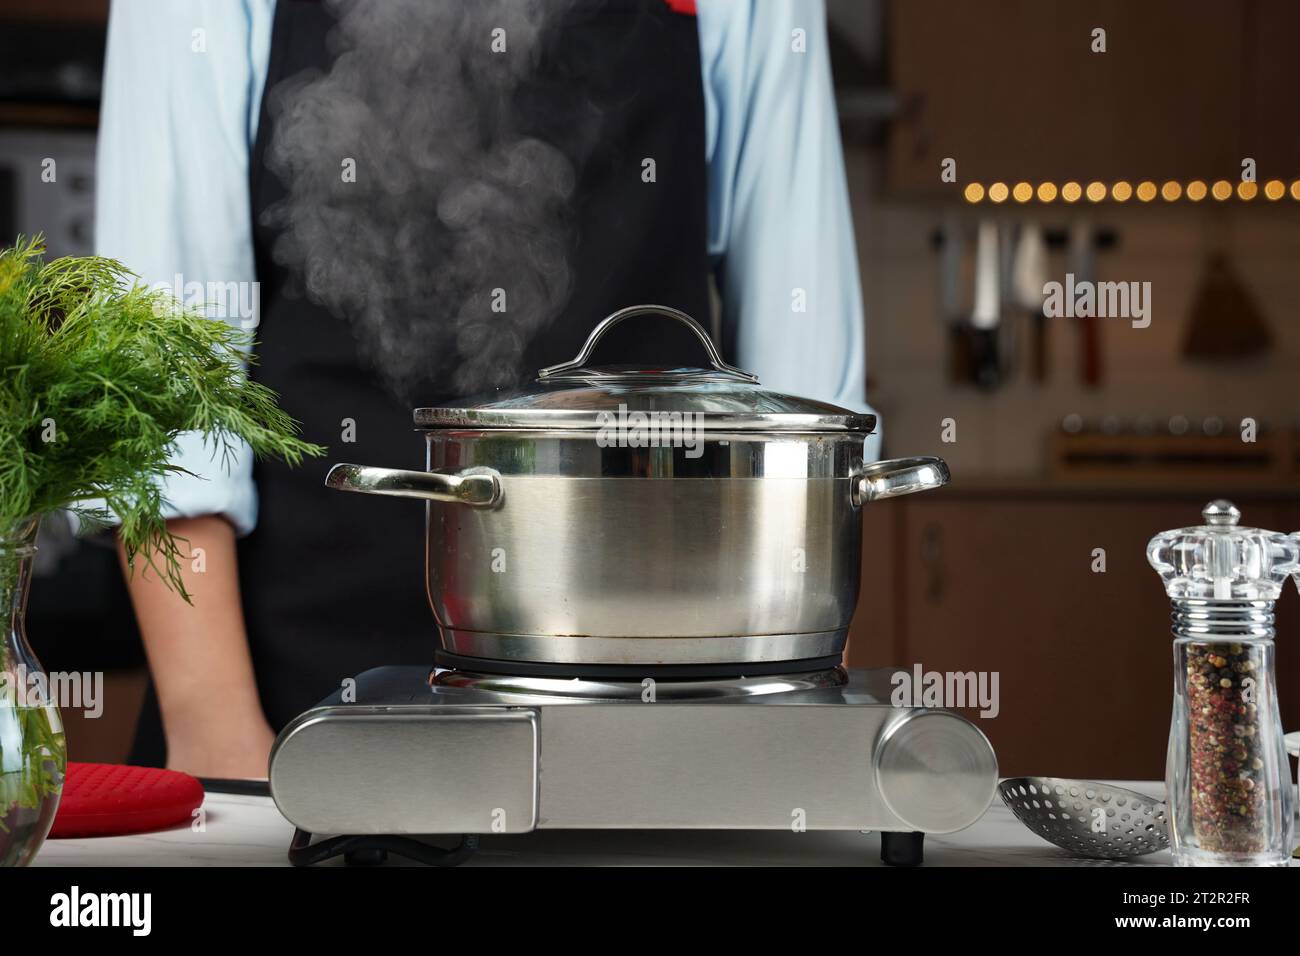 https://c8.alamy.com/comp/2T2R2FR/steel-cooking-pan-on-electric-hob-with-boiling-water-2T2R2FR.jpg